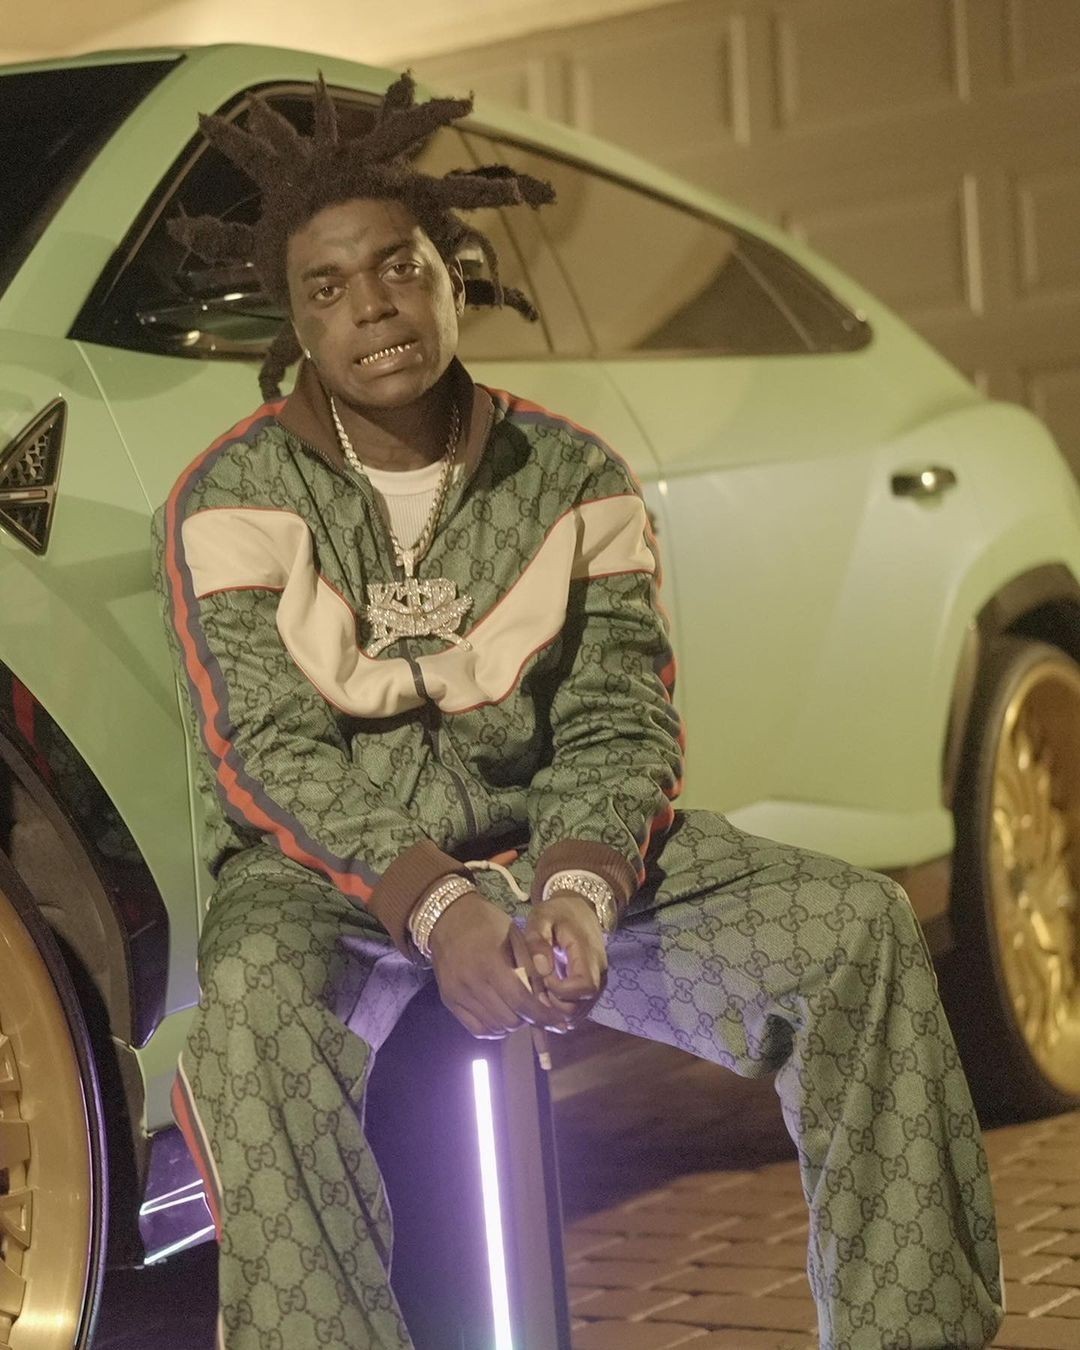 Don't Call 911! Kodak Black Ran Out of Cars to Match With, Now